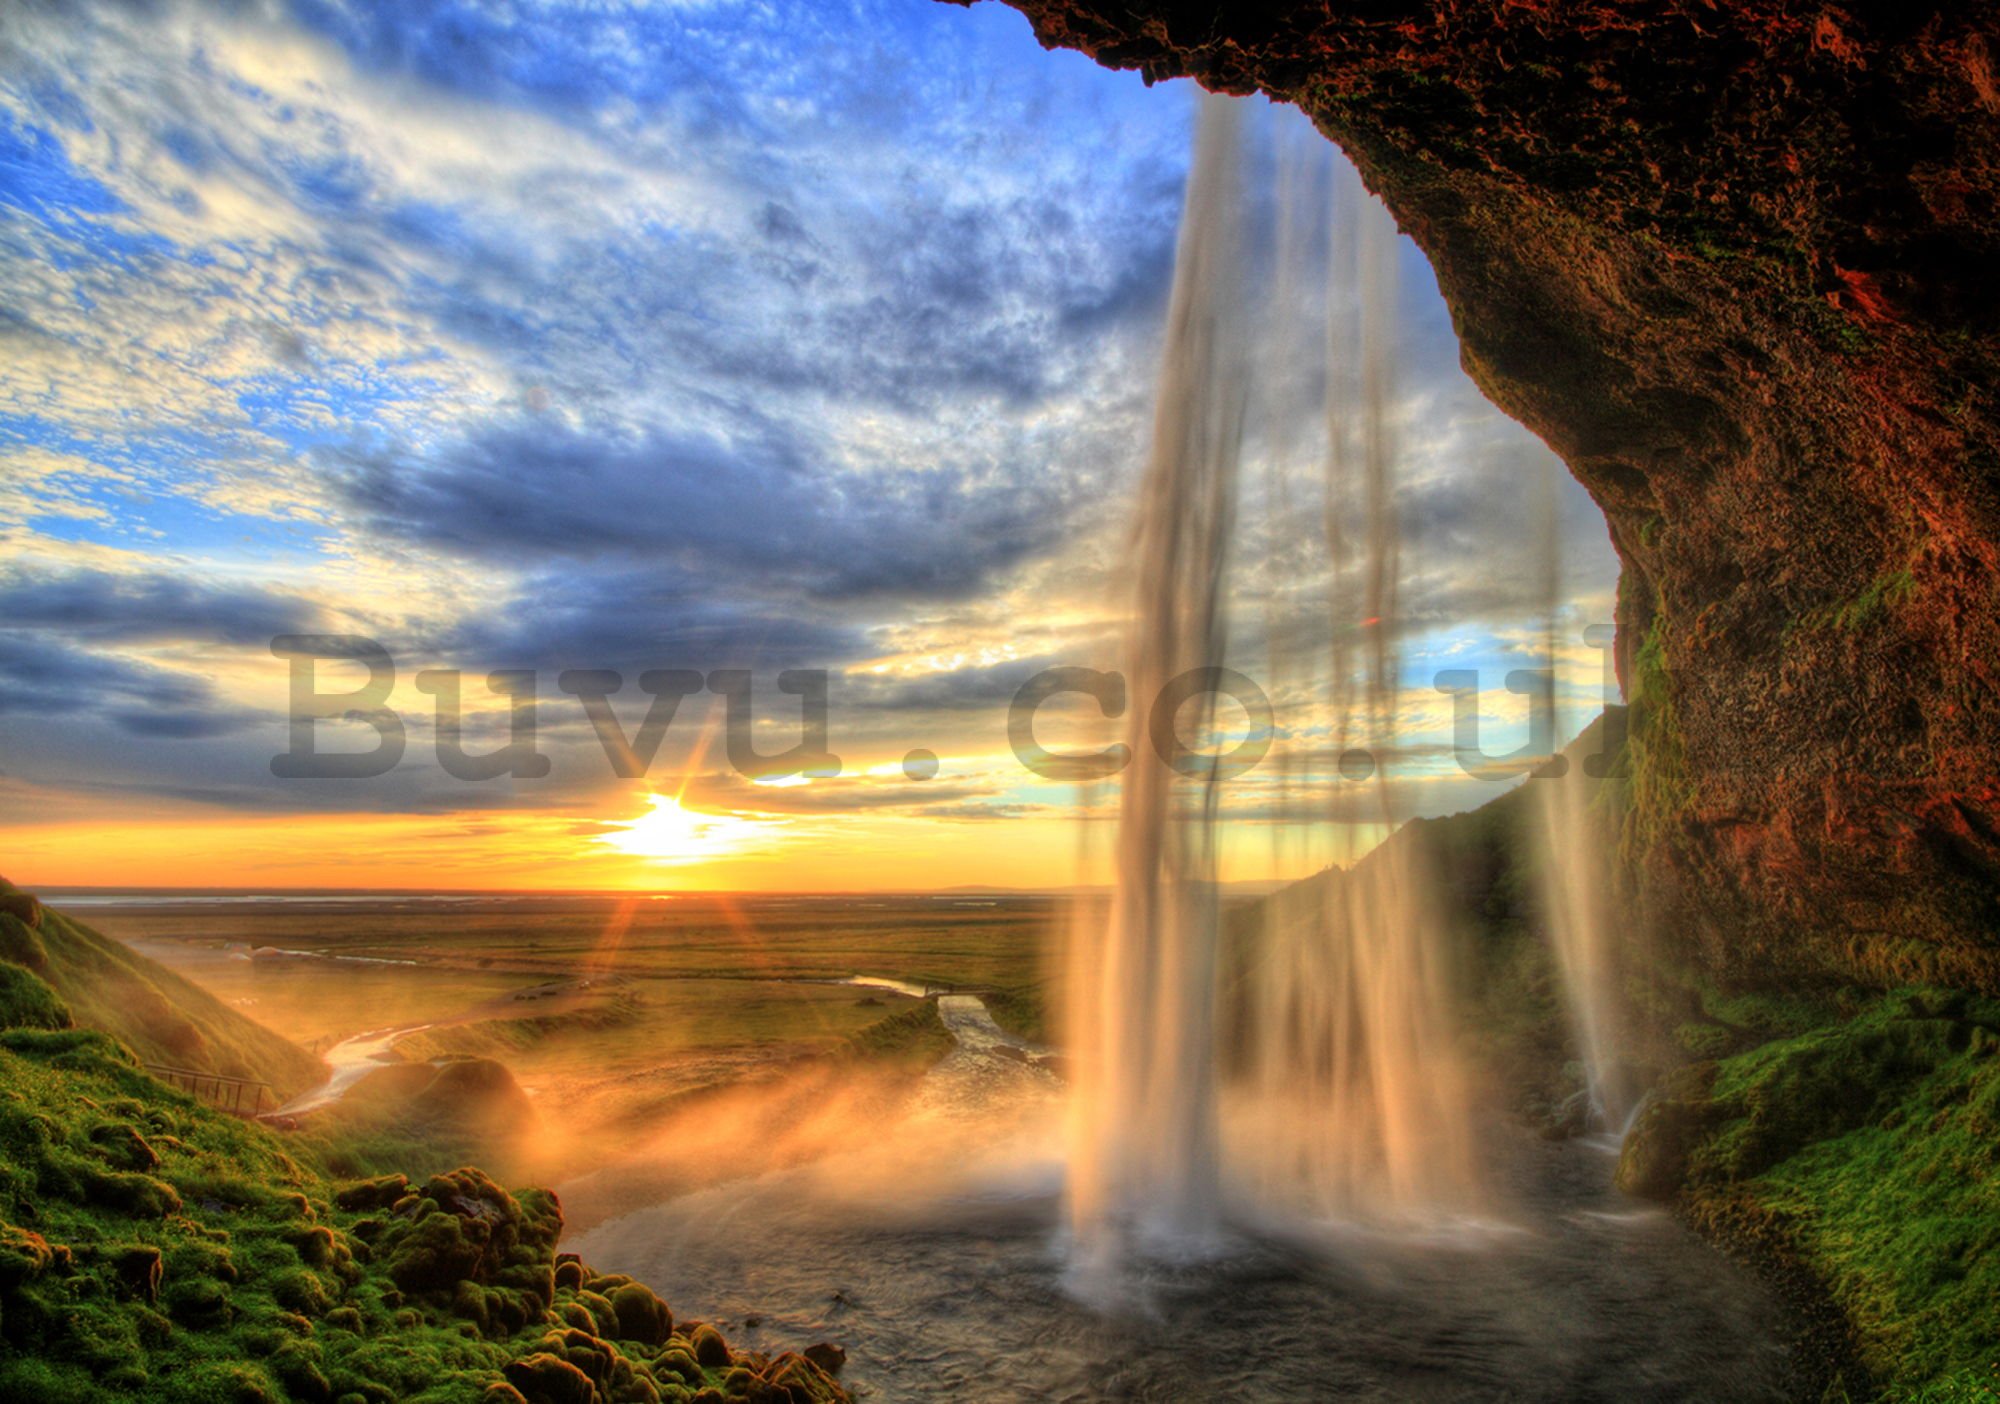 Wall mural: Waterfall at sunset - 254x368 cm